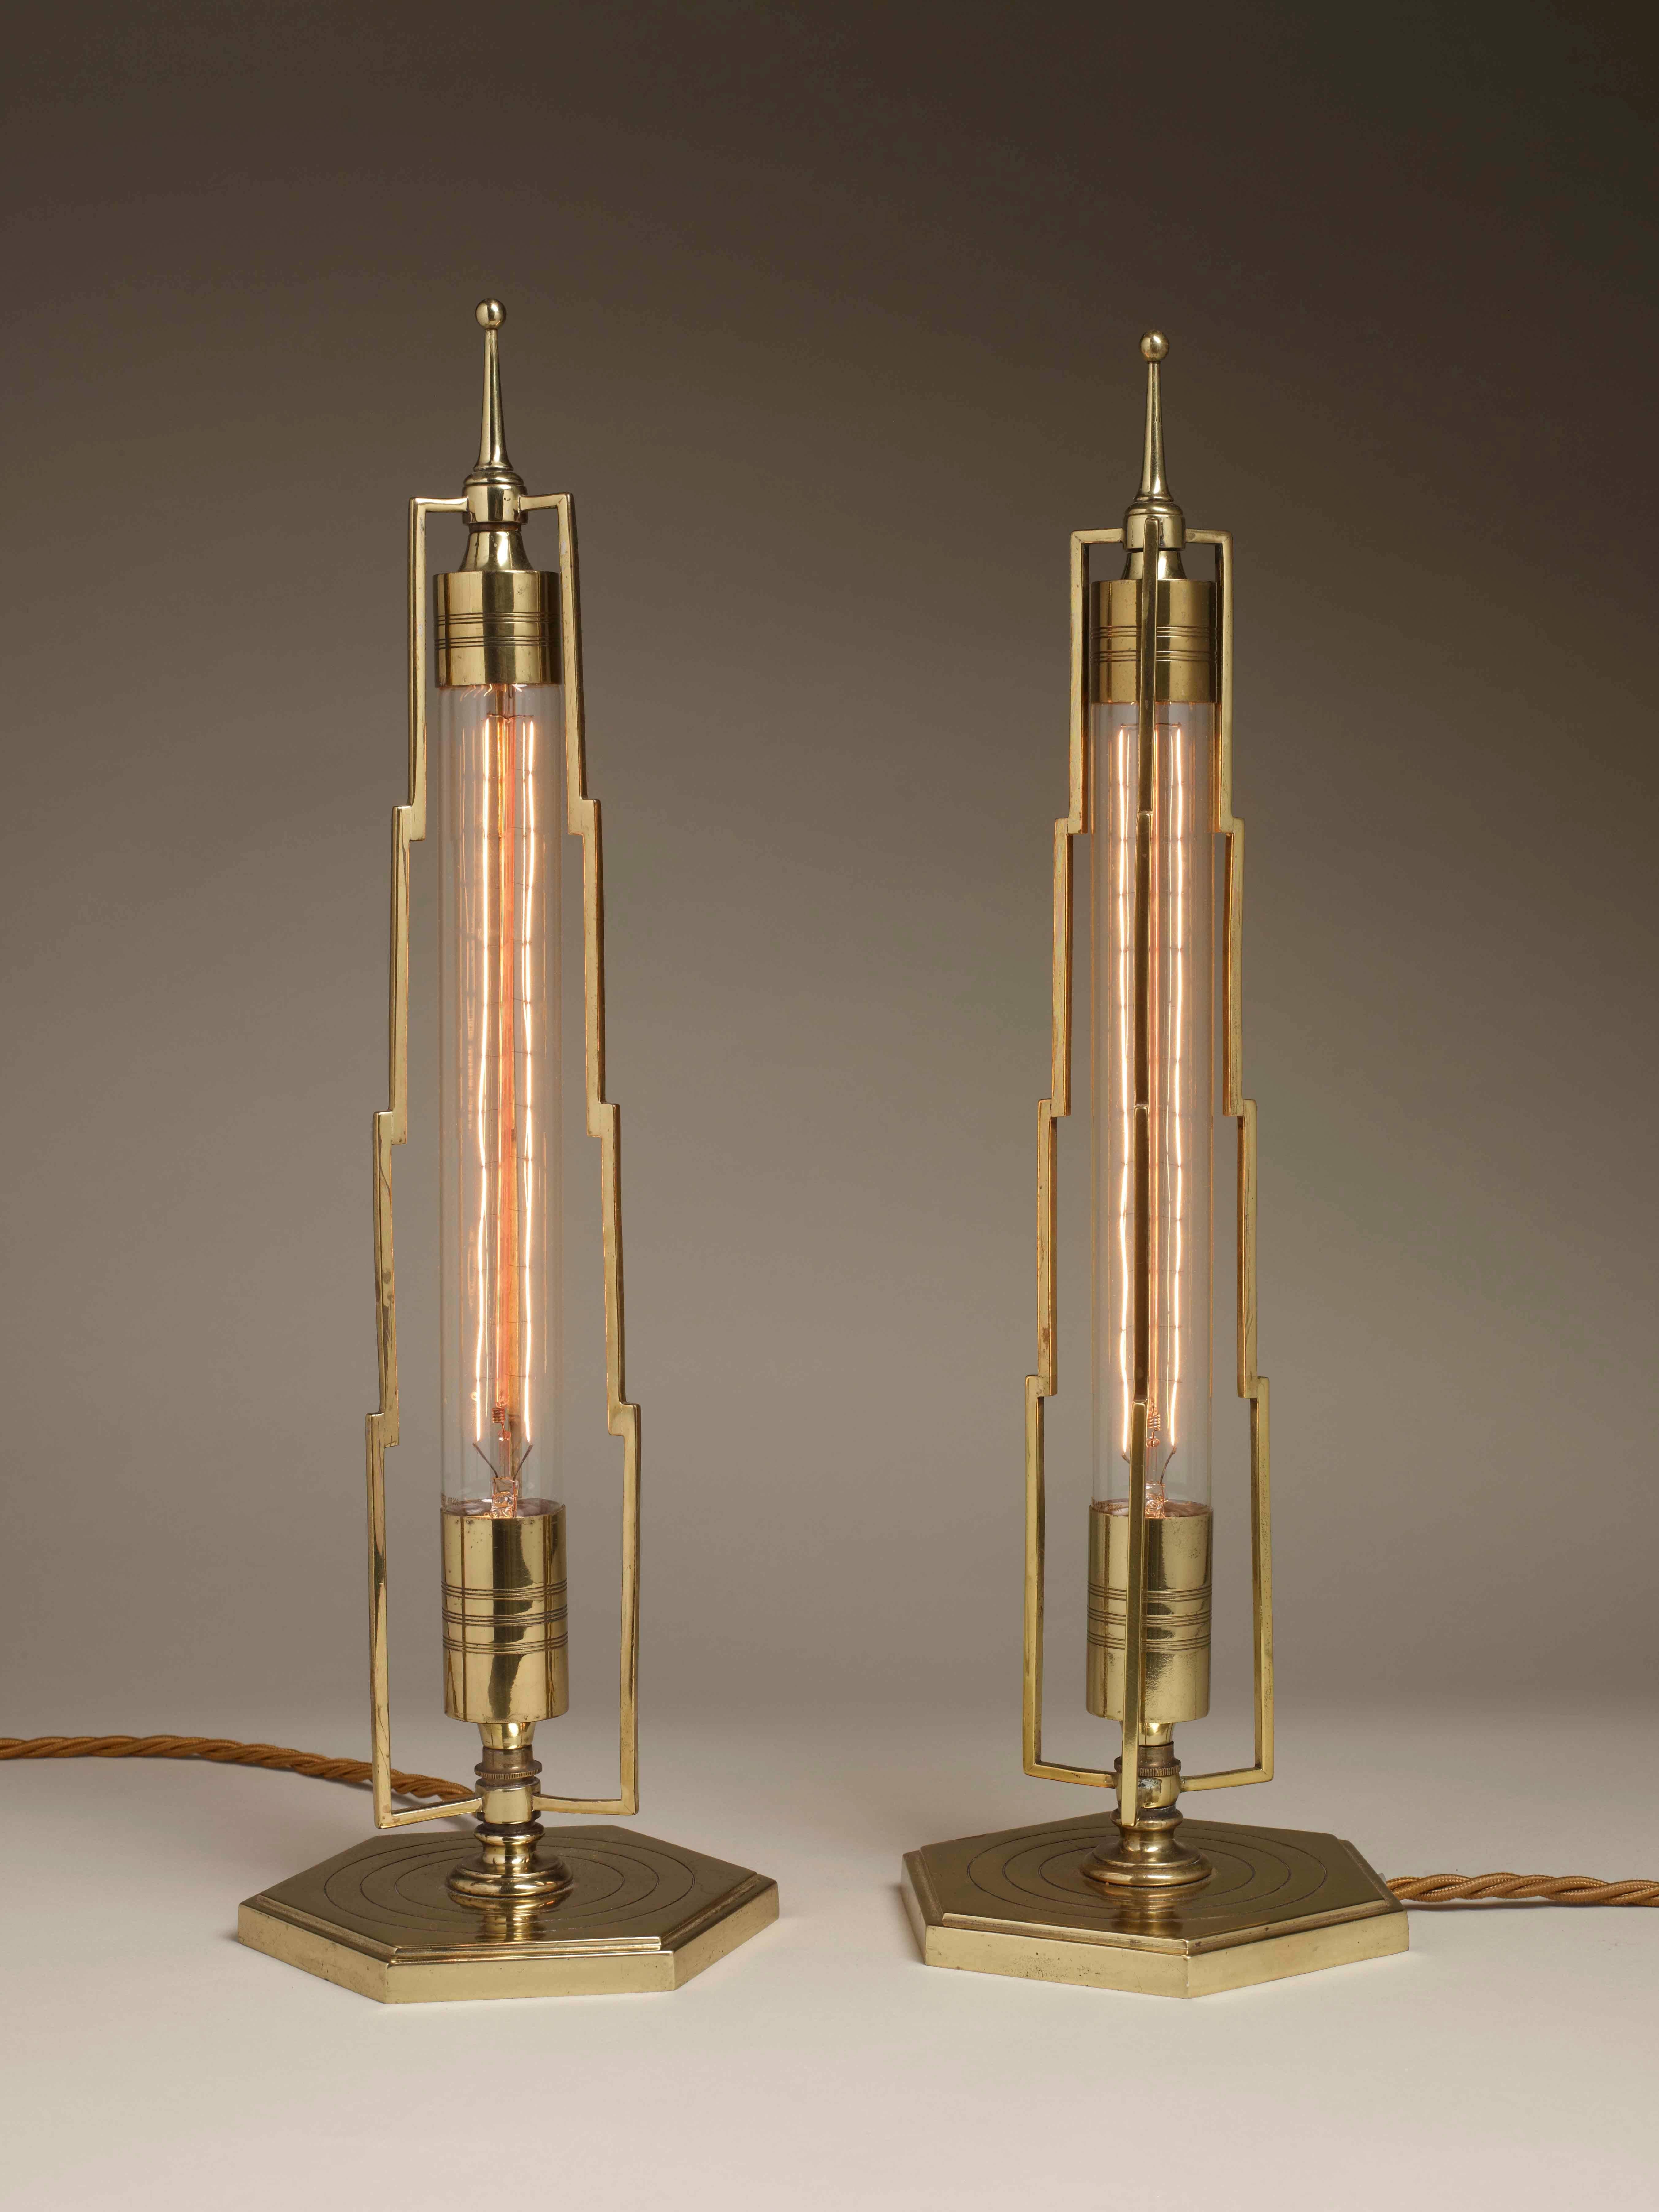 An unusual pair of Art Deco futuristic tube table lamps.

With opaline glass with collars of engraved polished brass, inside a framework of stepped brass tapering to a pointed finial spire. Standing on a hexagonal base with further engraved